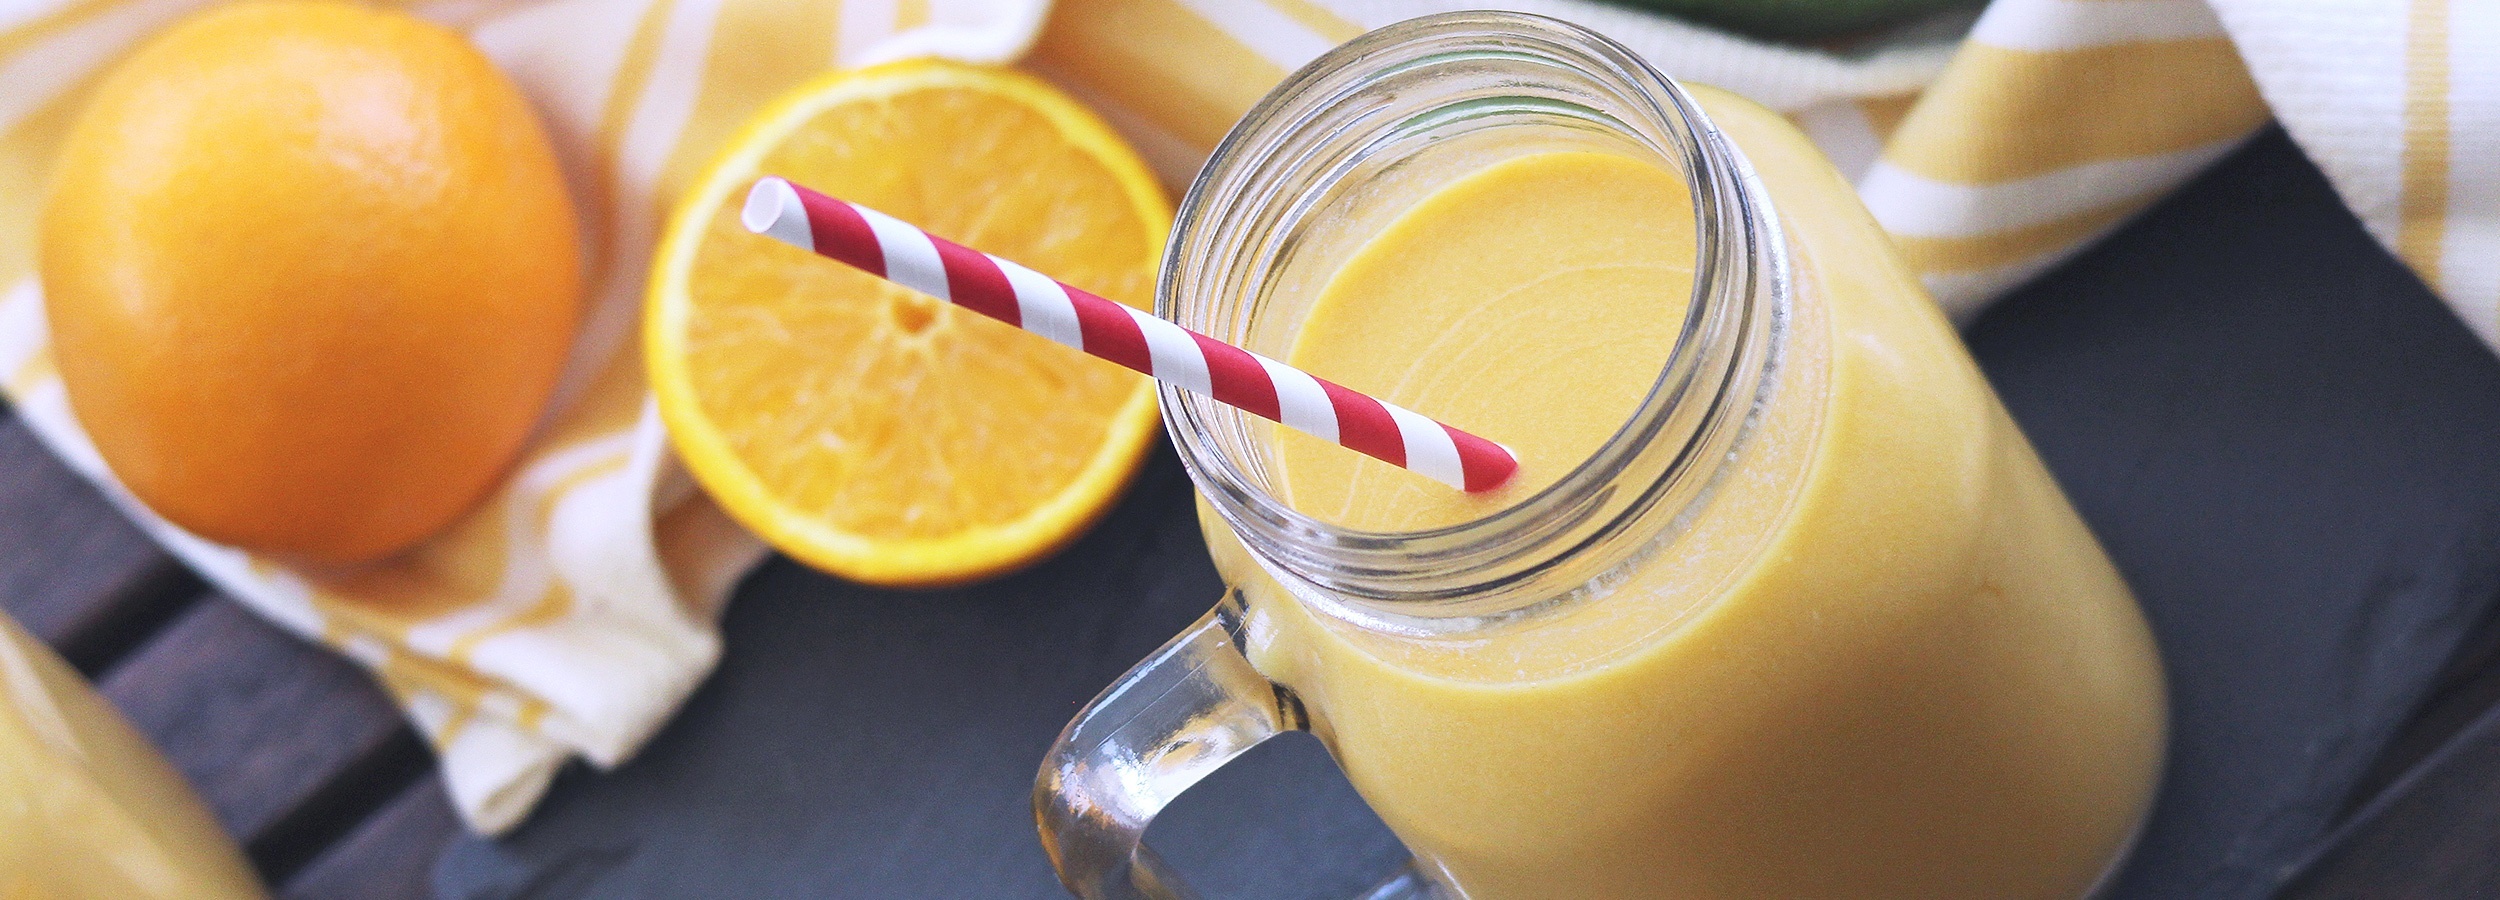 smoothies contain natural sweeteners 